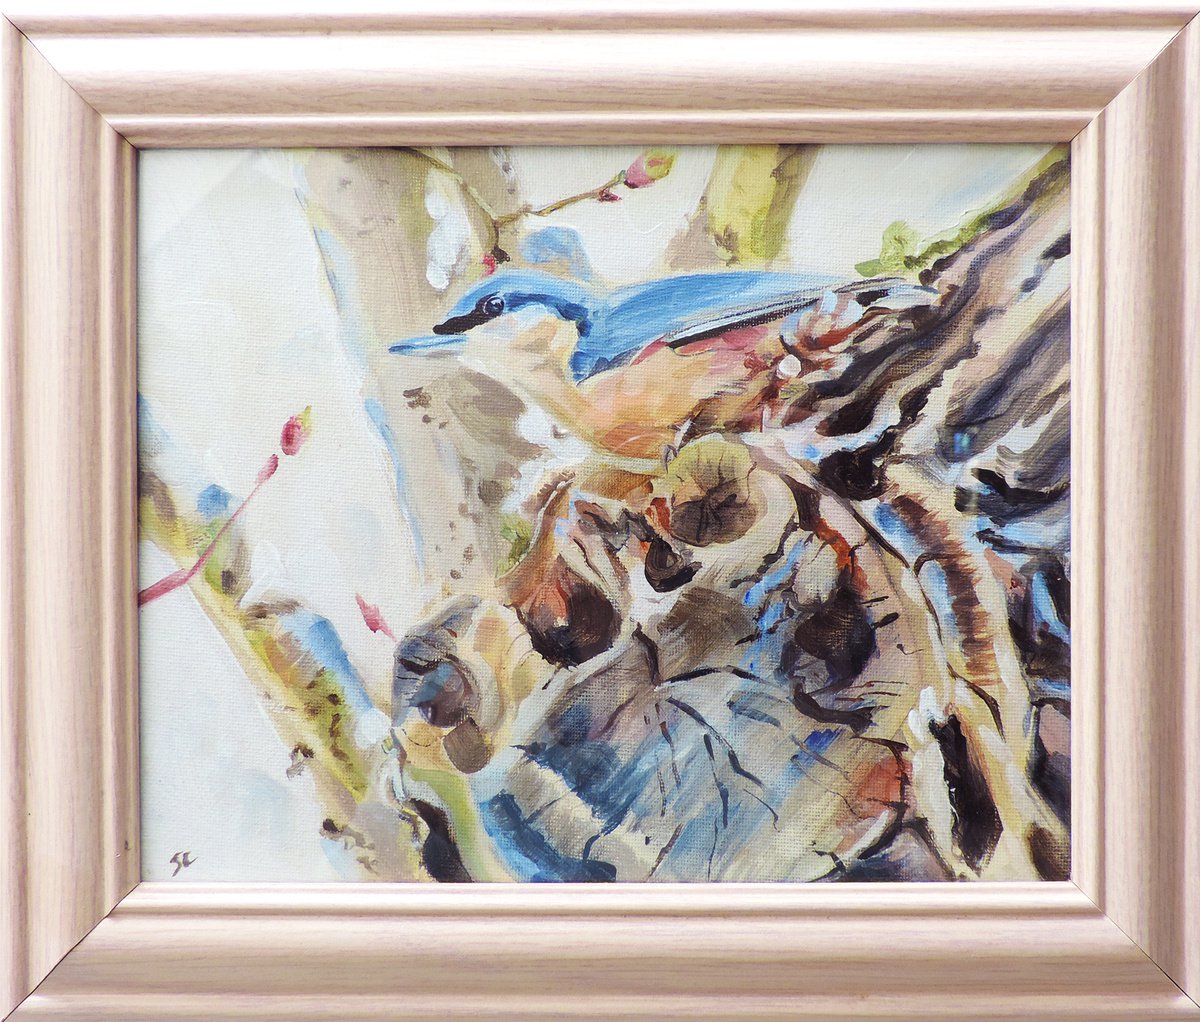 Nuthatch up High (framed) by Sheila Chapman